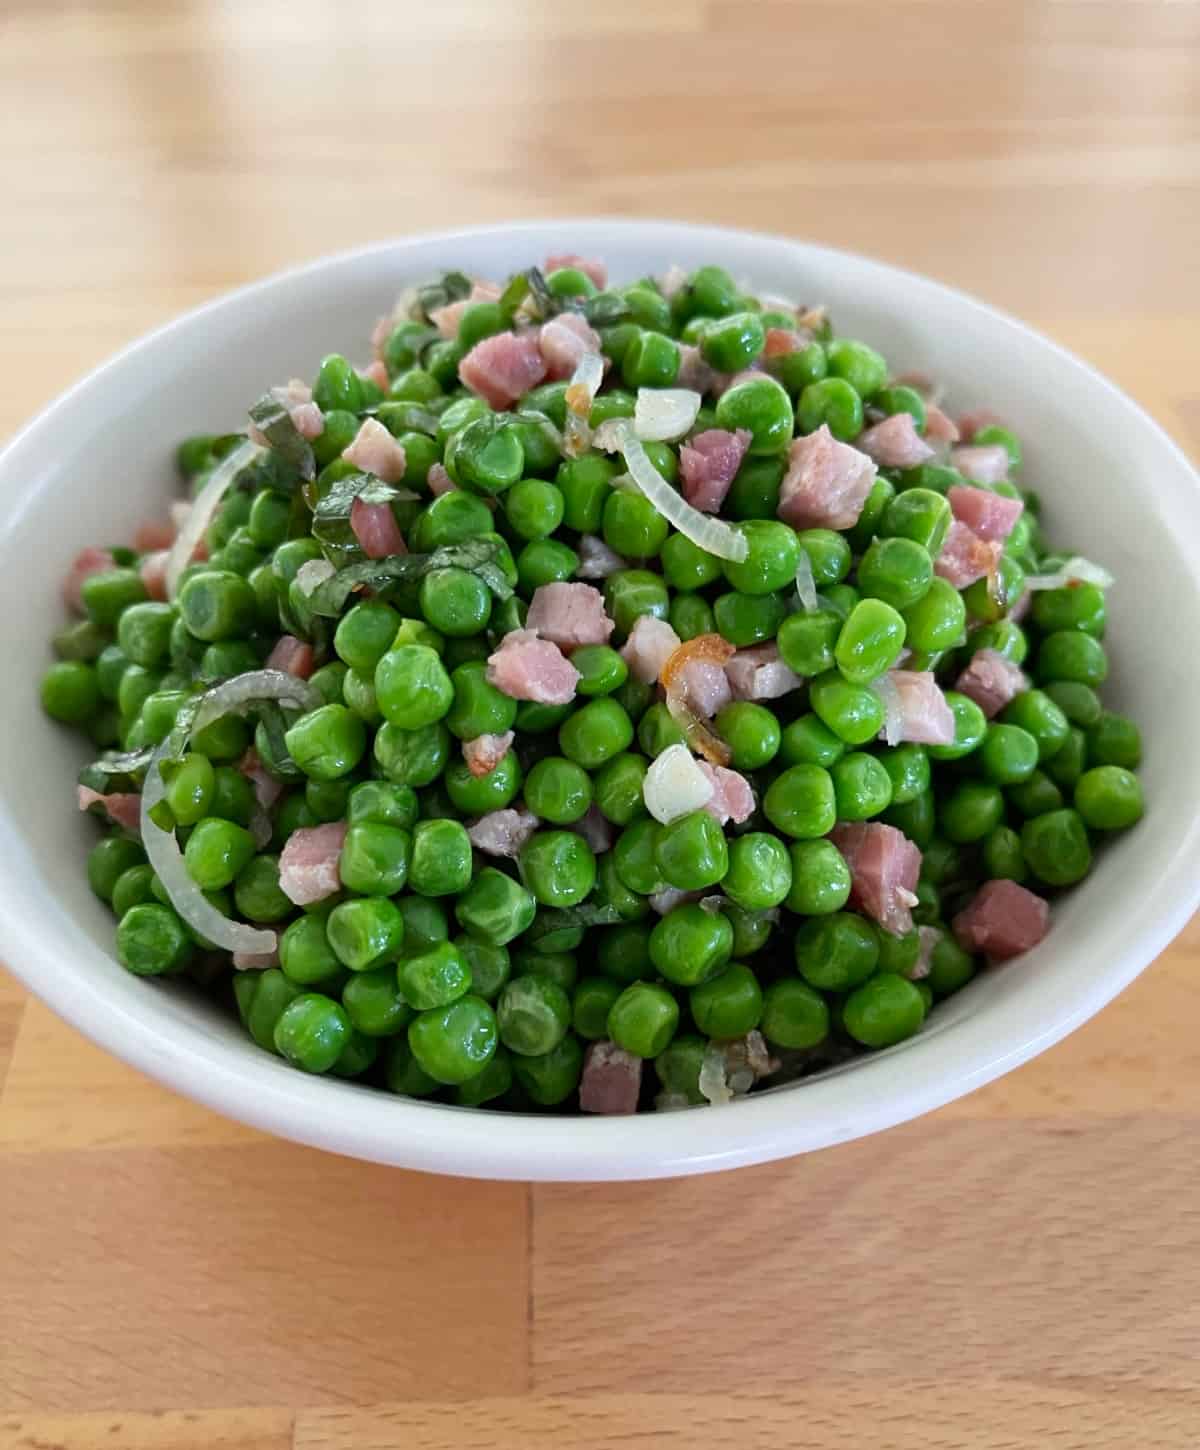 Peas and pancetta in white serving bowl on wood table.